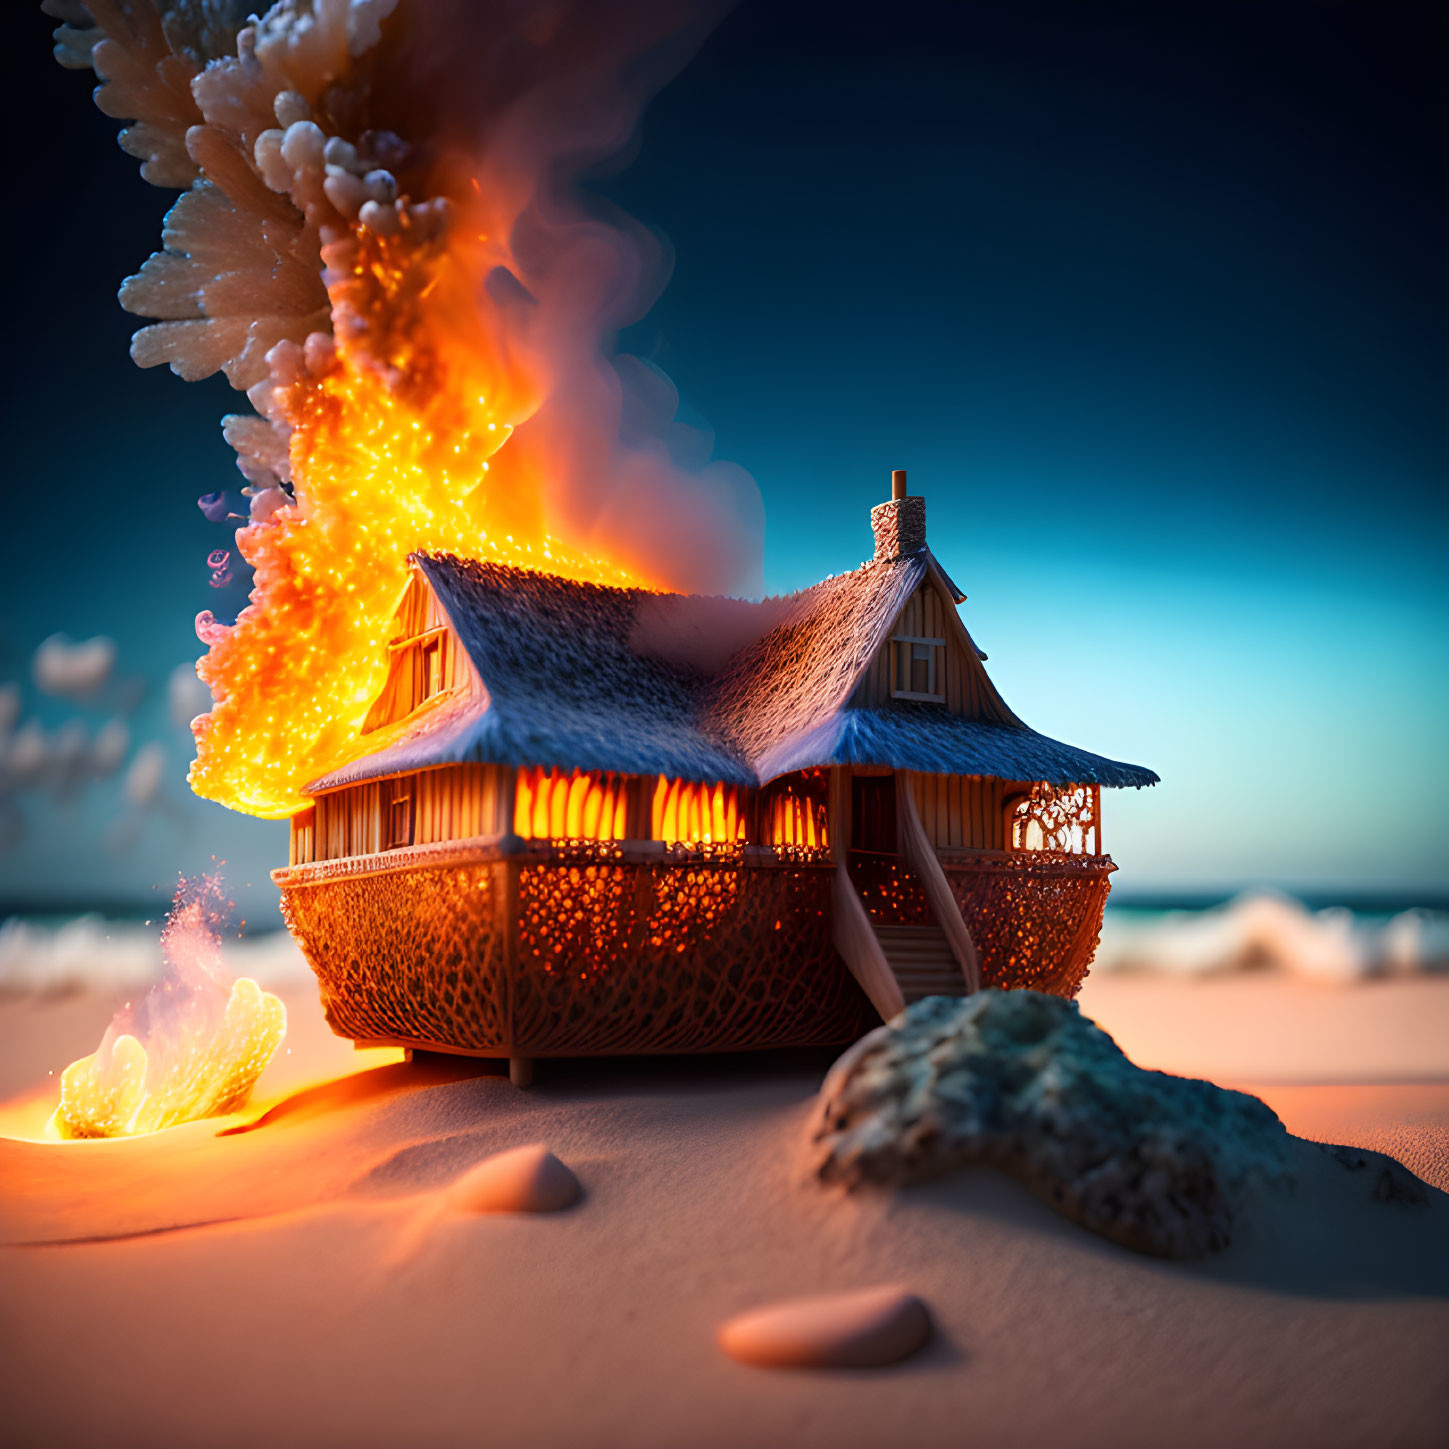 Thatched-roof beach house on fire by ocean shore